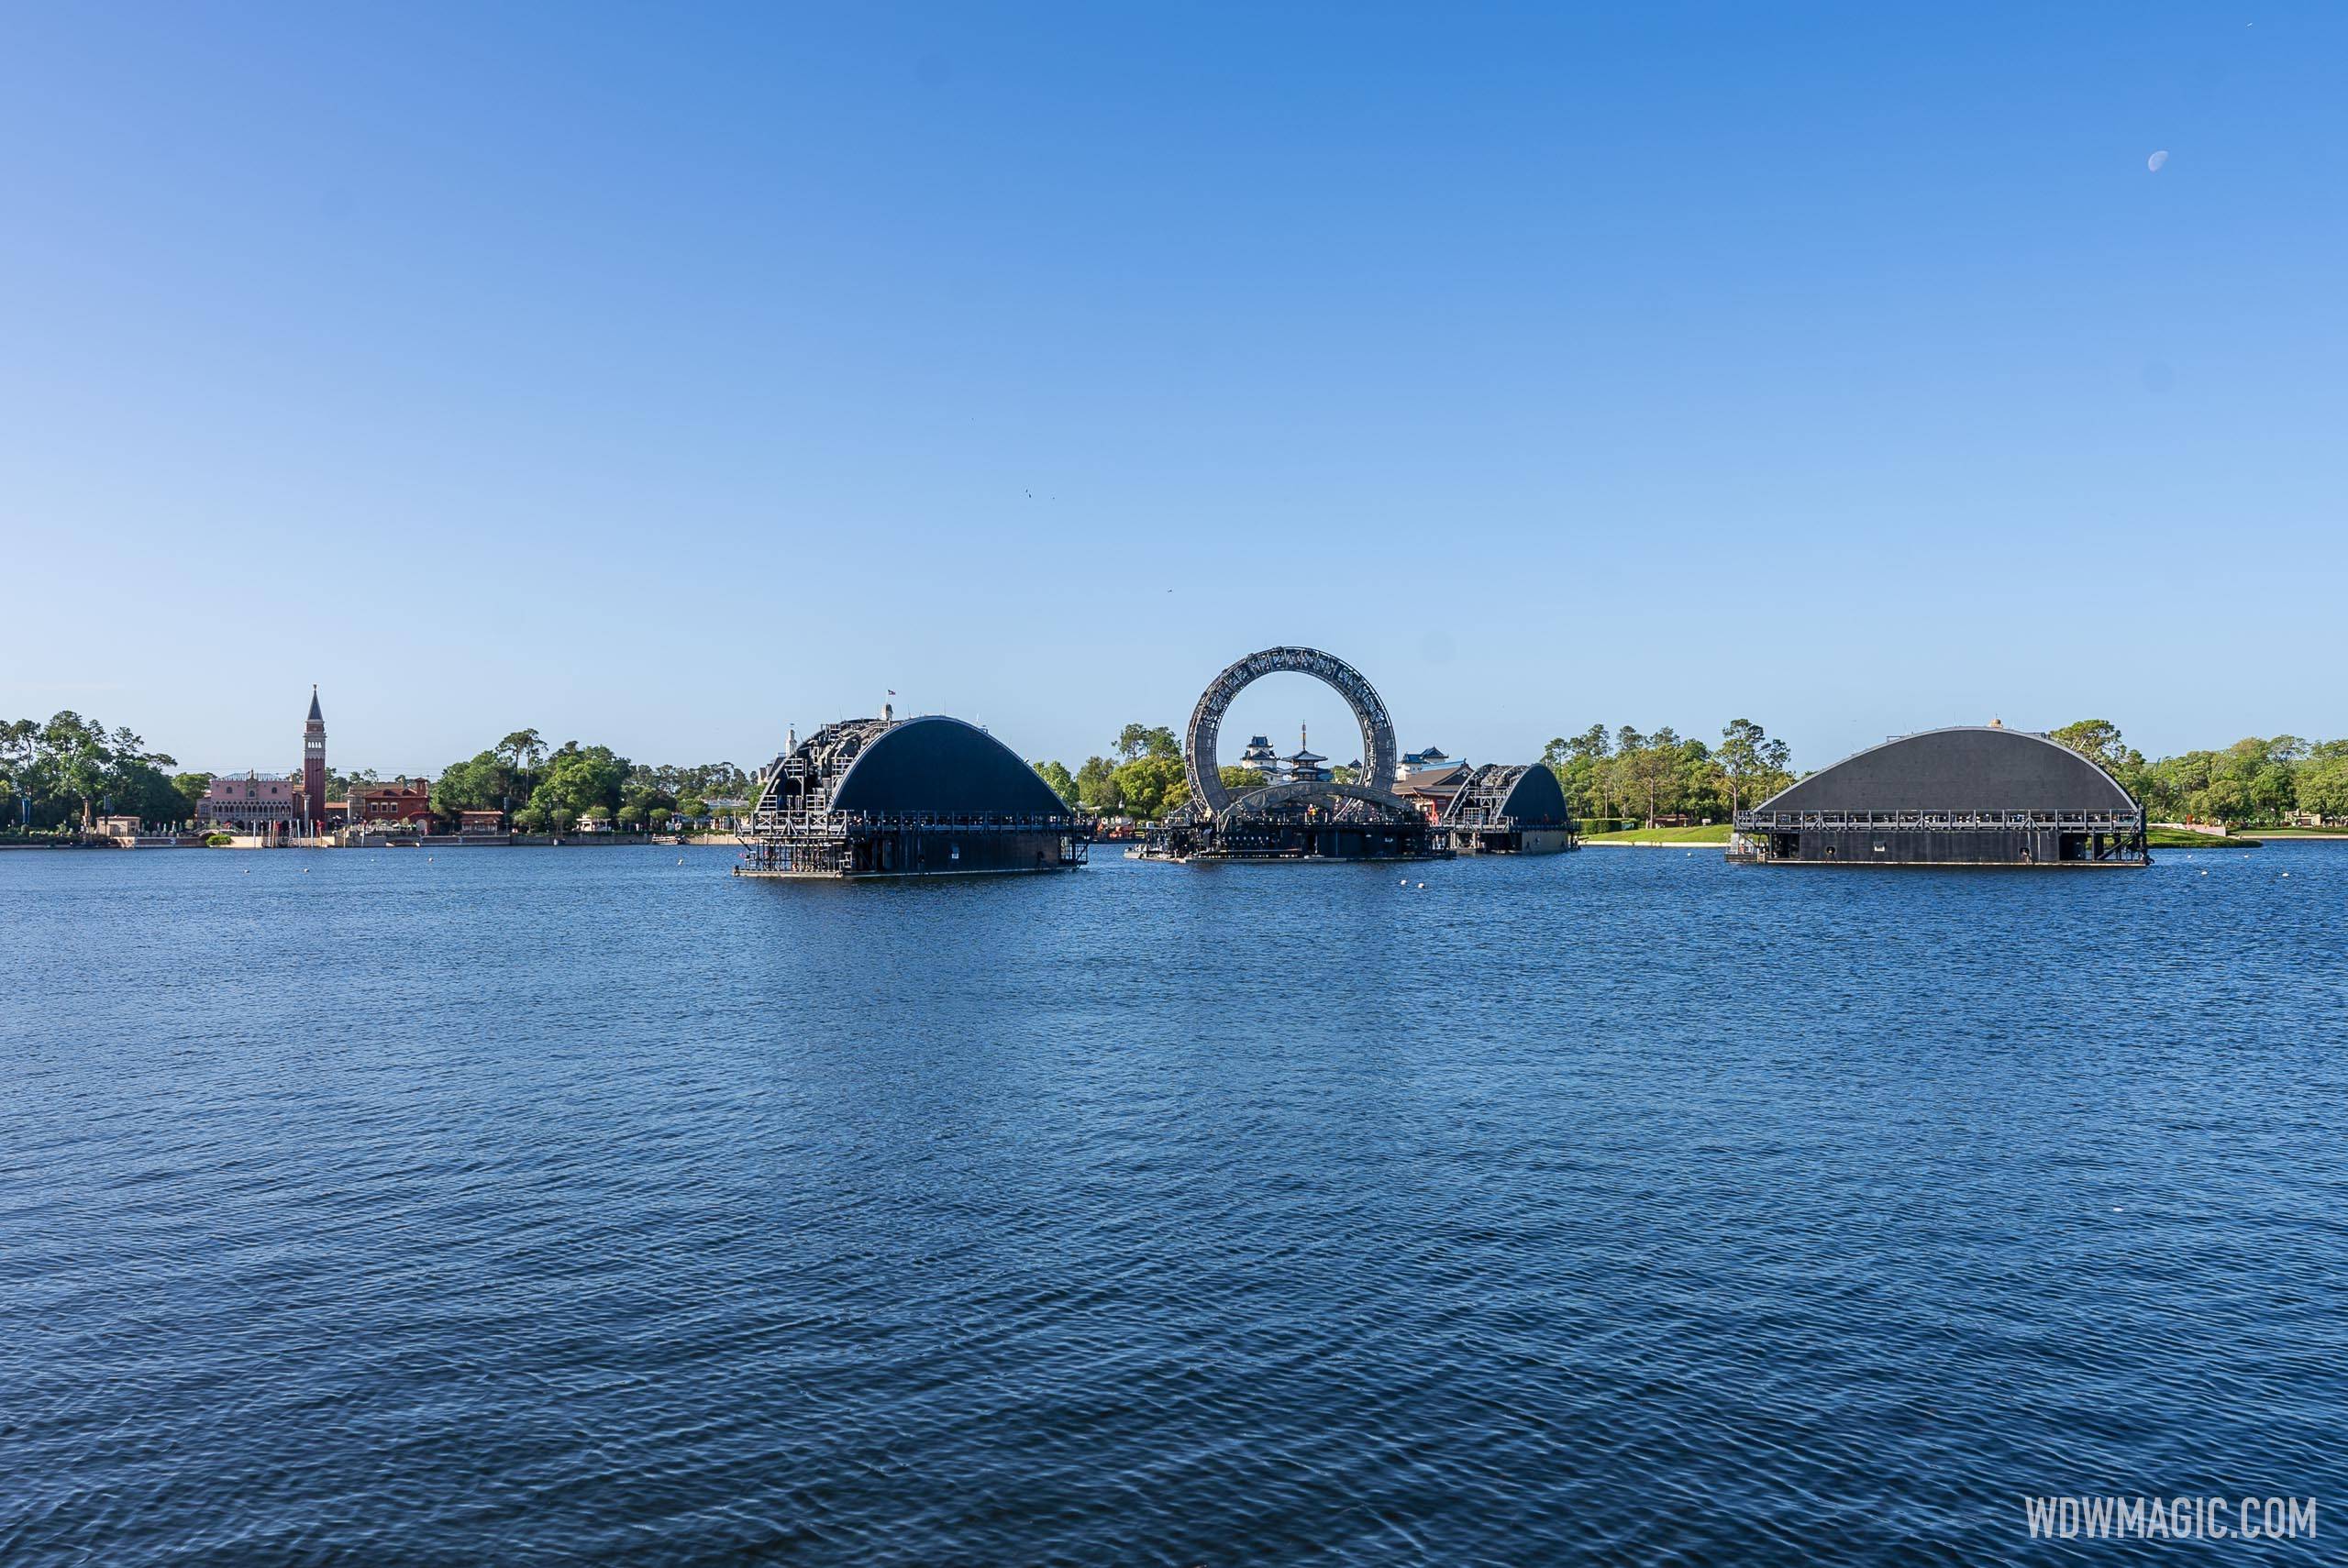 Six barges currently remain the World Showcase Lagoon at EPCOT